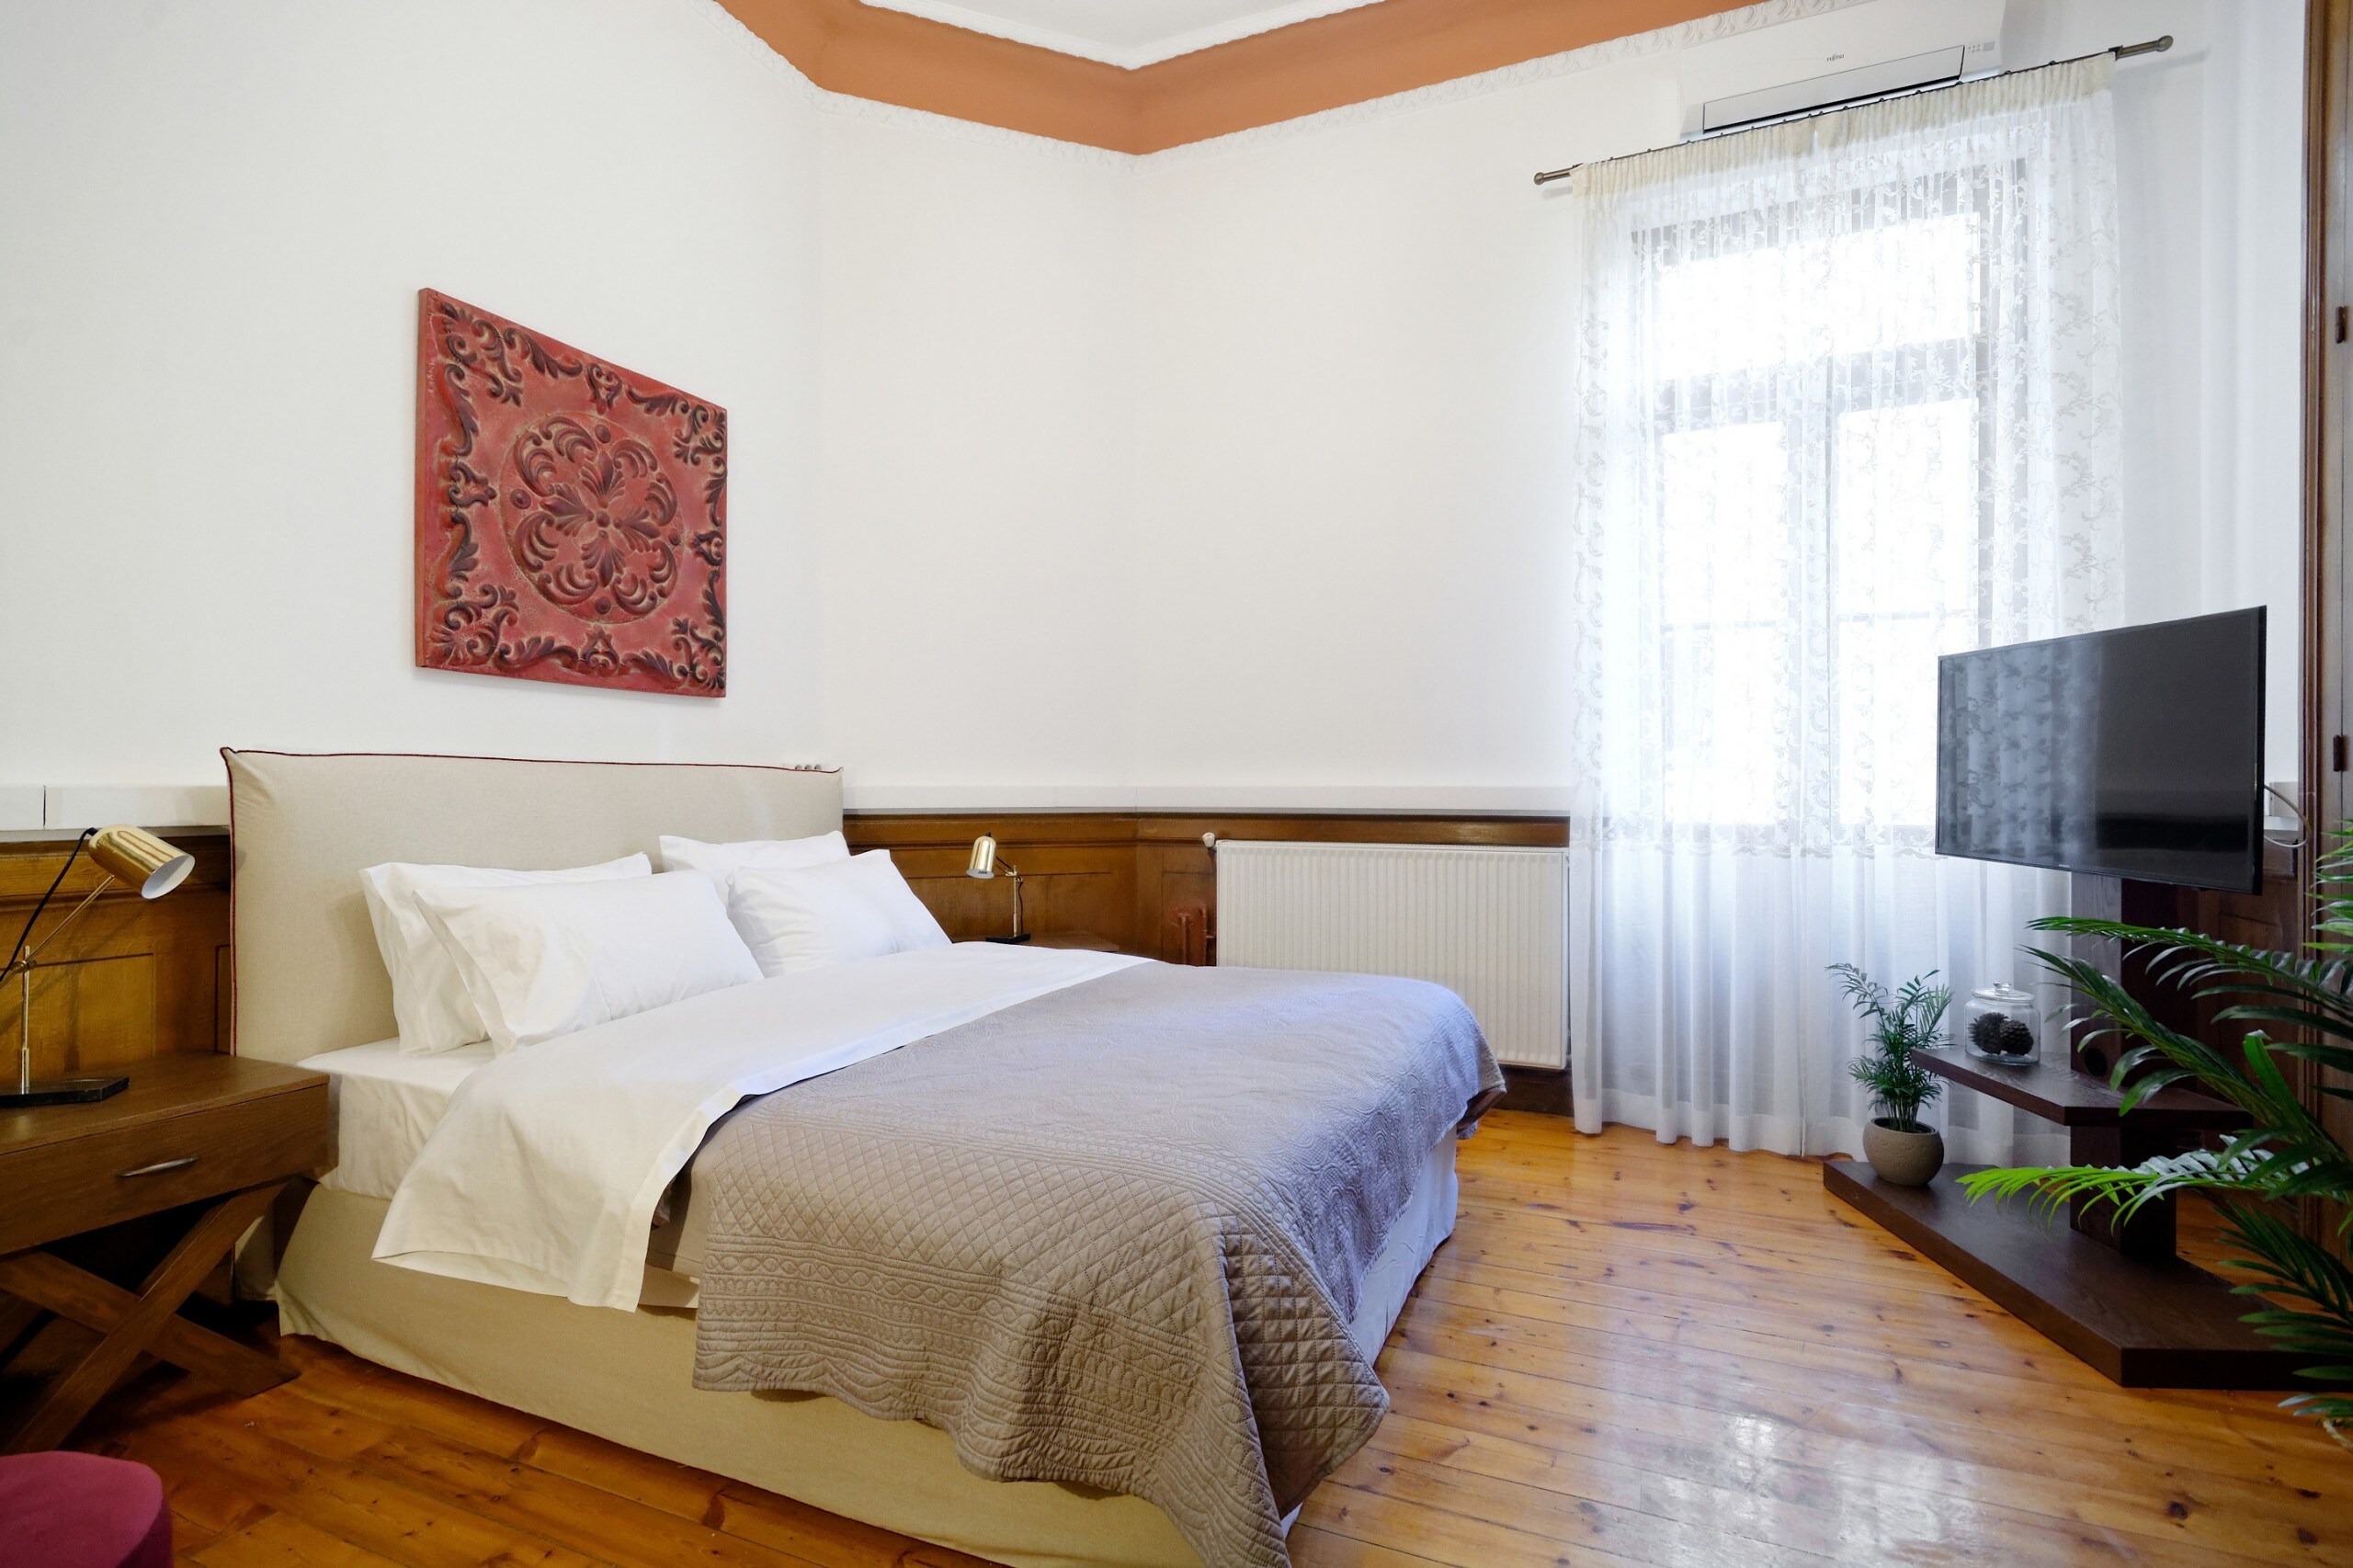 Spacious bedrooms full of light in neoclassical building, wooden floors and details will make your stay unforgettable. 